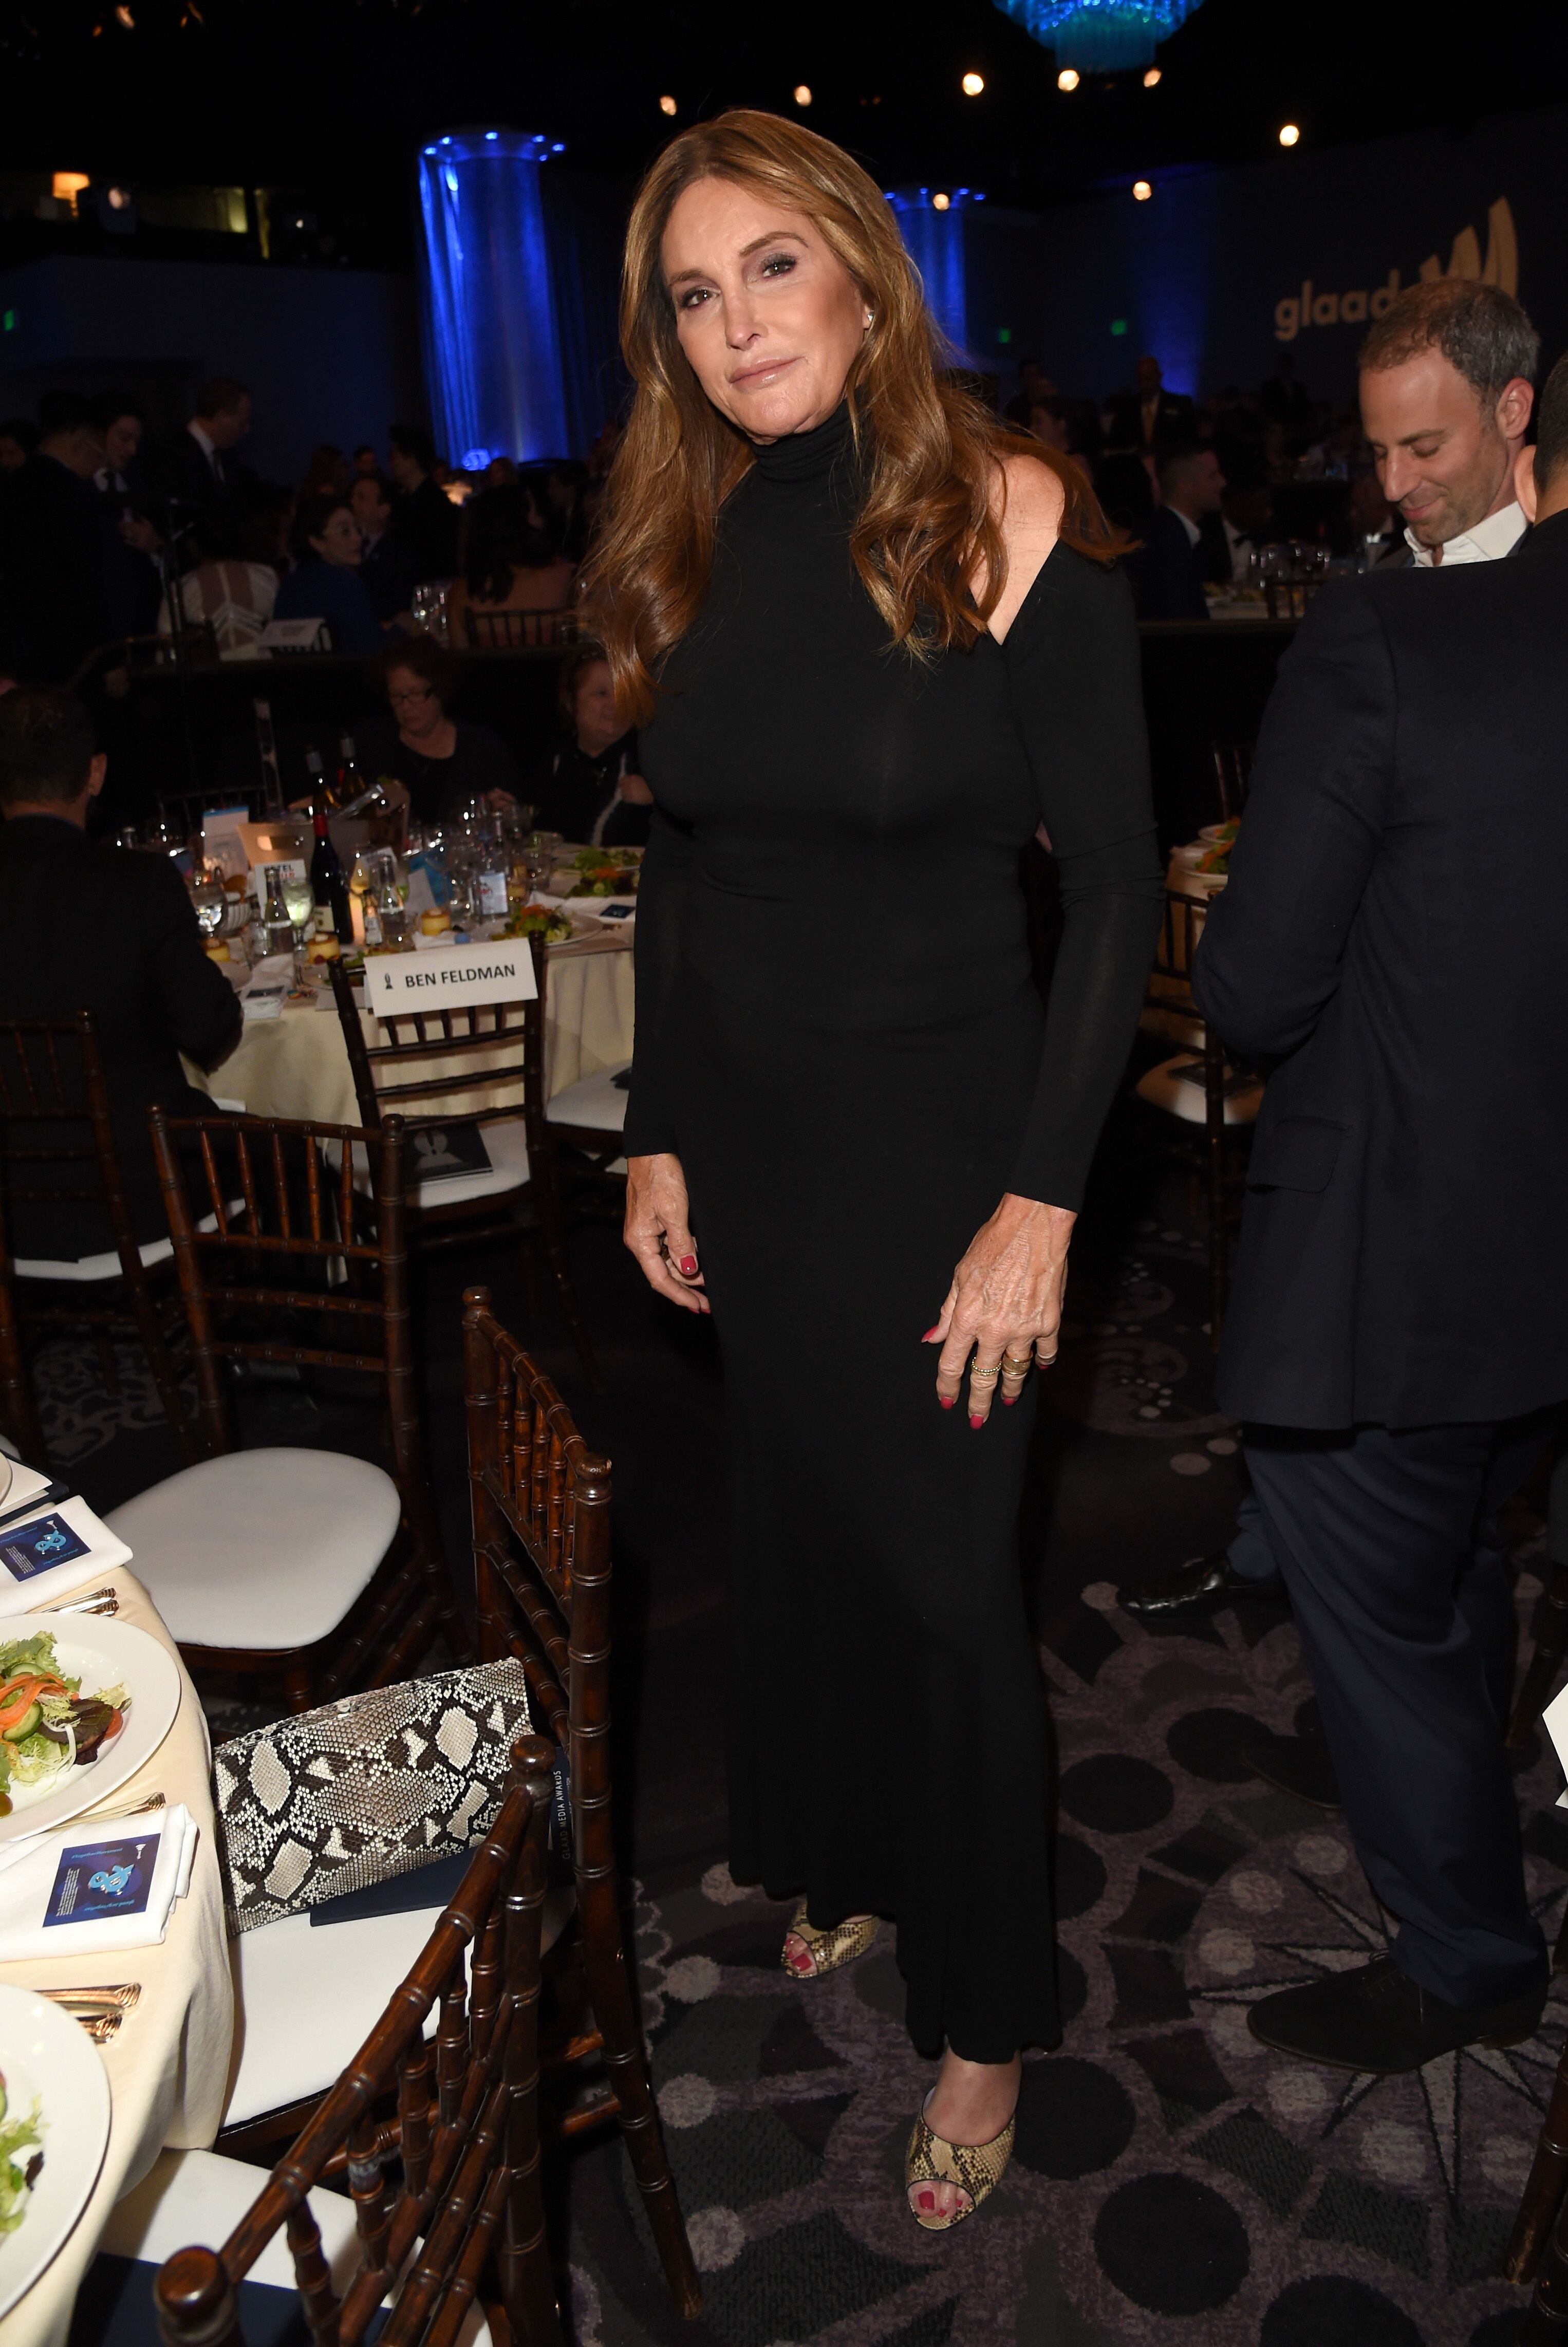 Caitlyn Jenner at the 29th Annual GLAAD Media Awards at The Beverly Hilton Hotel on April 12, 2018, in Beverly Hills, California | Photo: J. Merritt/Getty Images